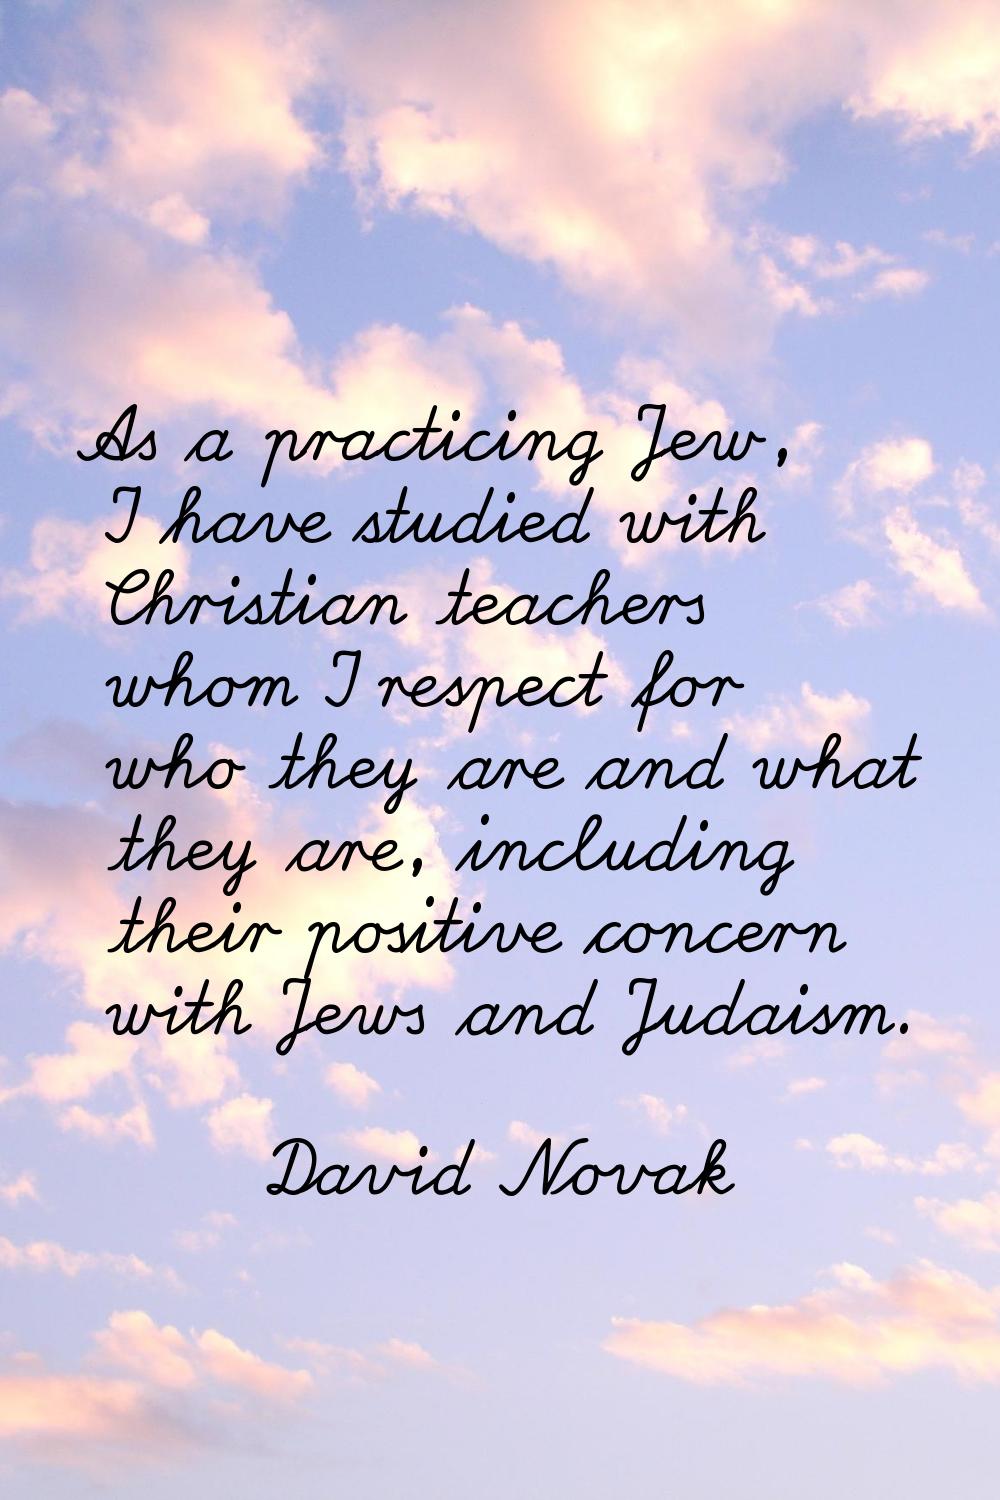 As a practicing Jew, I have studied with Christian teachers whom I respect for who they are and wha